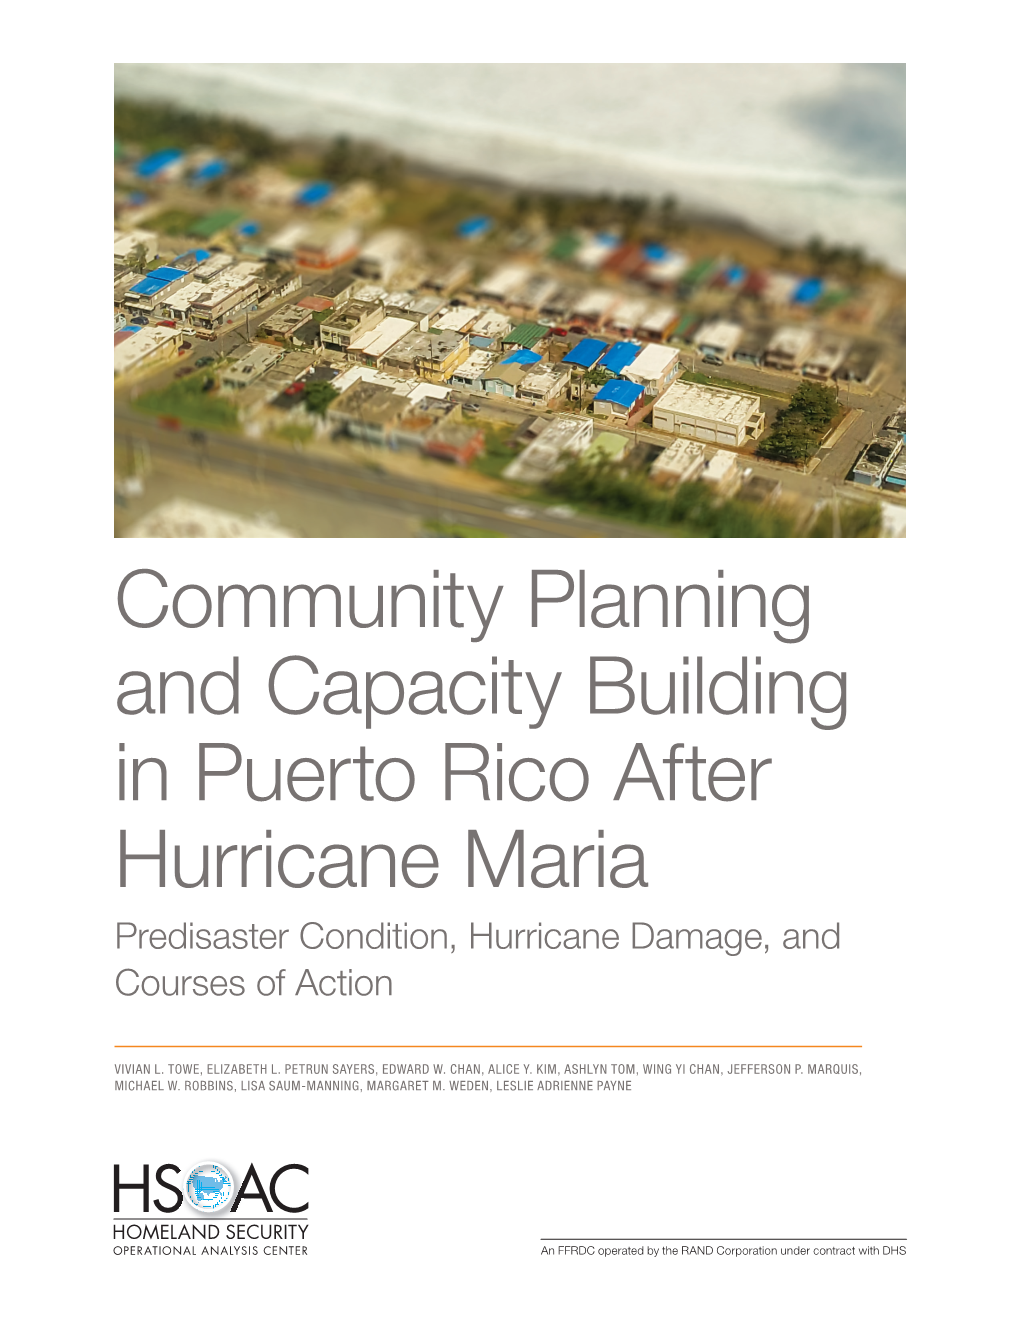 Community Planning and Capacity Building in Puerto Rico After Hurricane Maria Predisaster Condition, Hurricane Damage, and Courses of Action